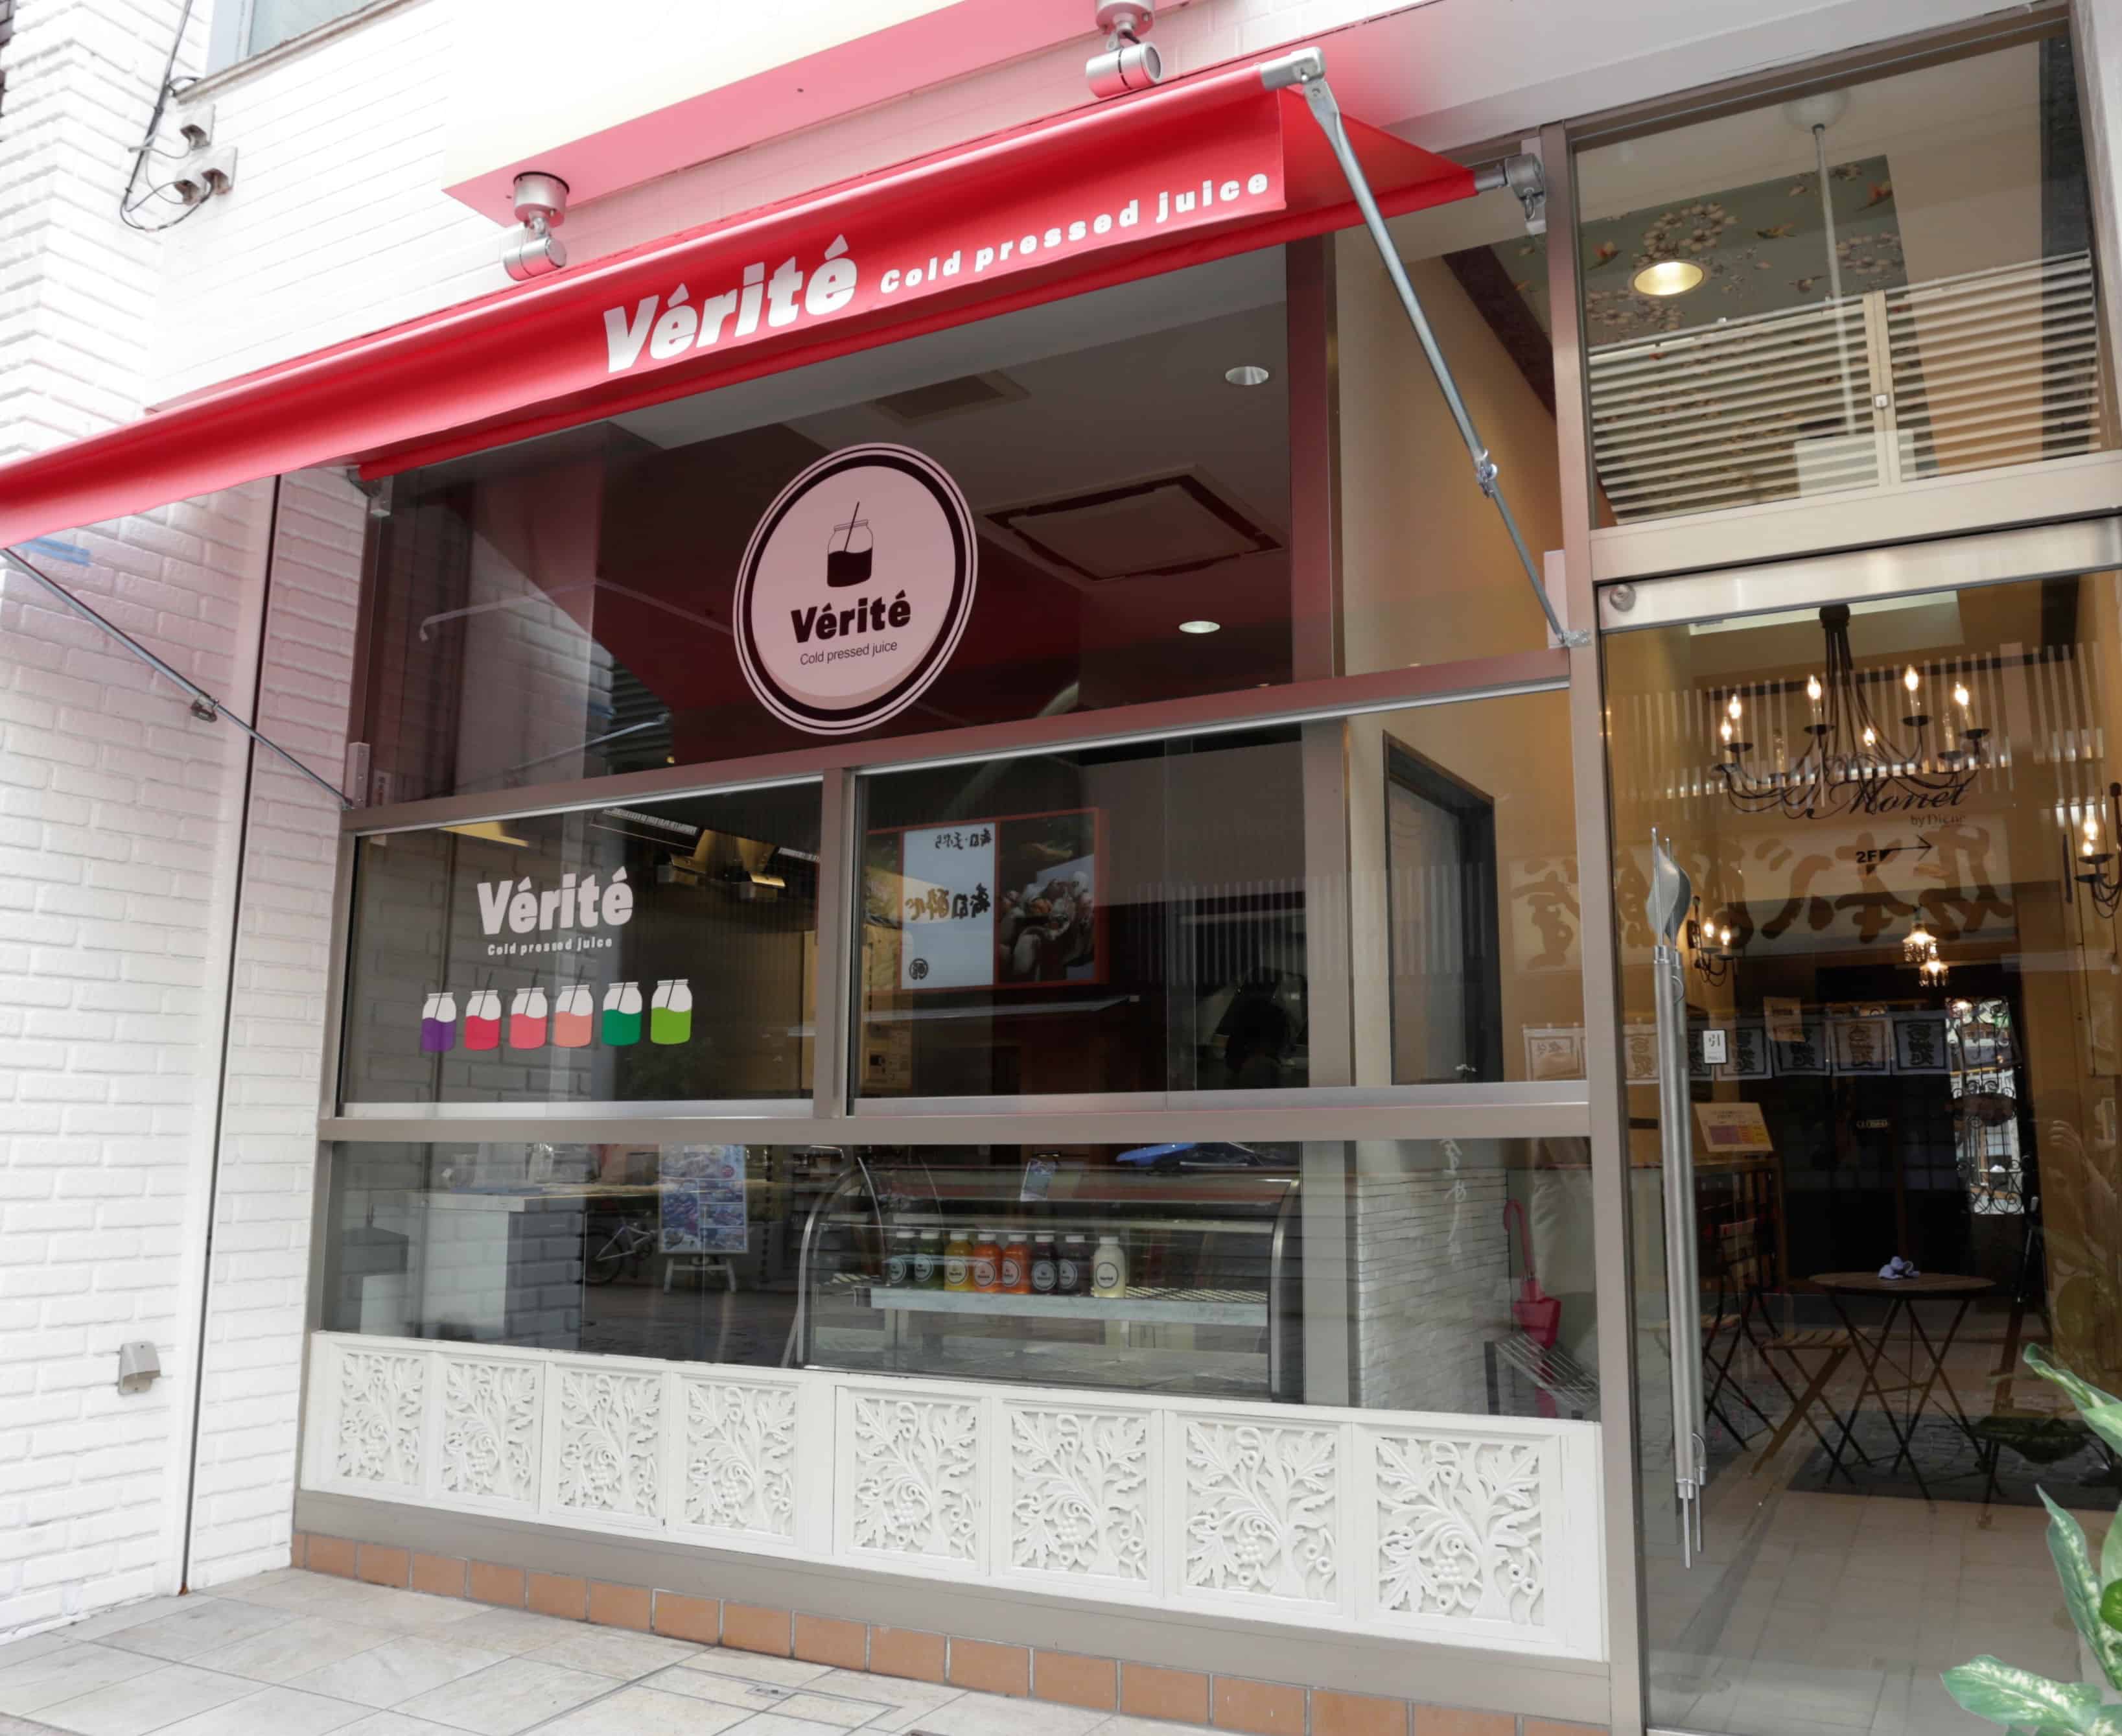 verite cold pressed juice store front in hiroshima japan